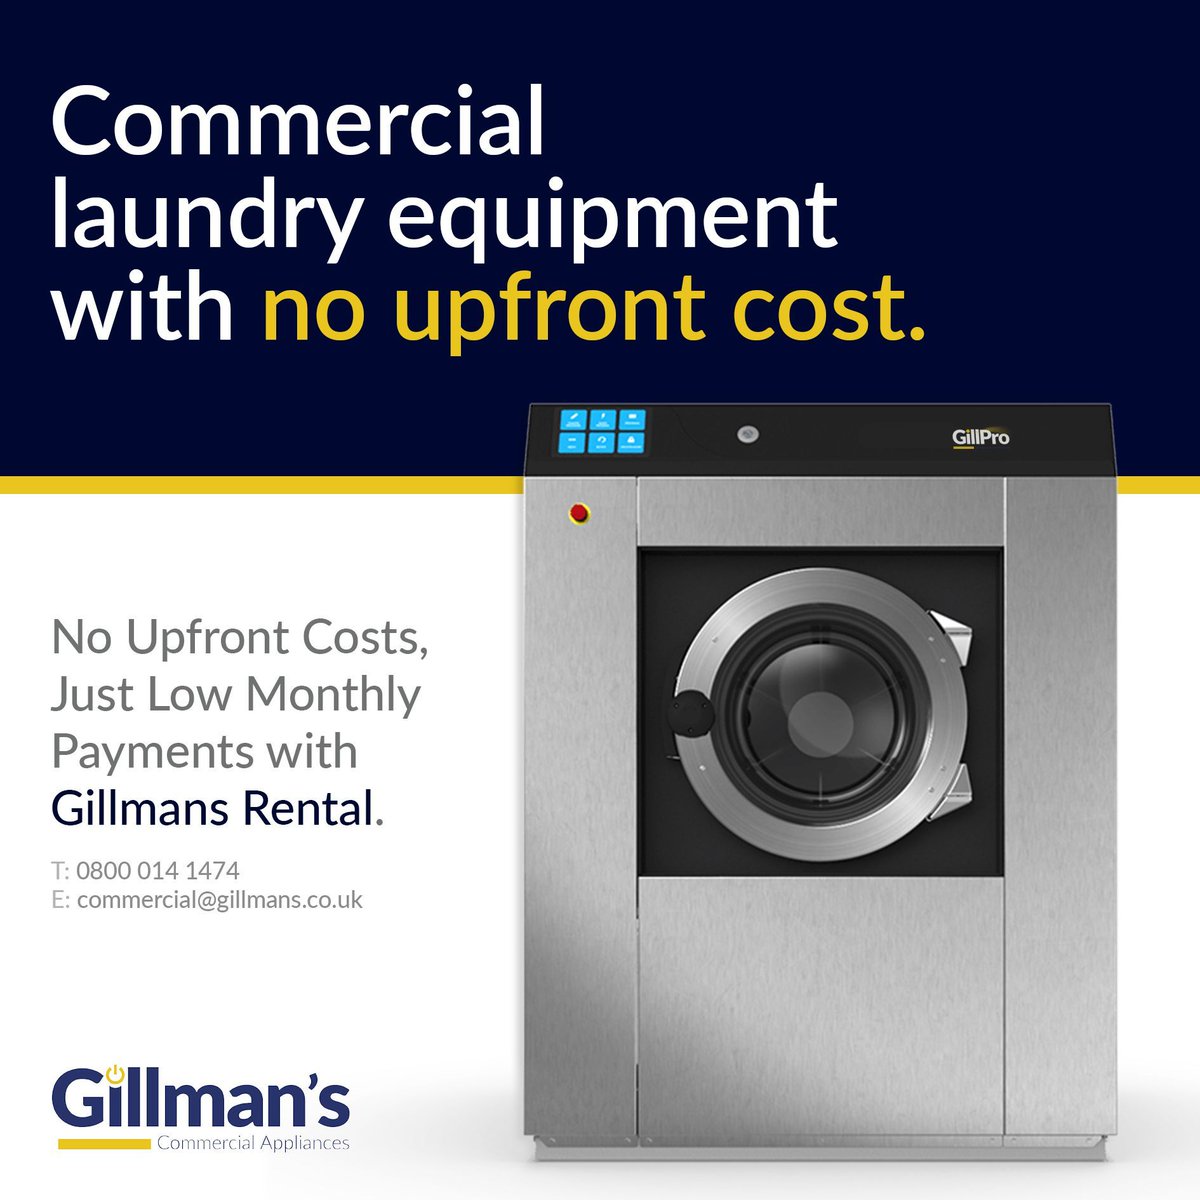 transform your laundry business with our revolutionary offer! Upgrade to our commercial laundry appliances for seamless efficiency and flexible payment options. Access top-of-the-line equipment without the hefty upfront costs. Contact us today to learn more! #CommercialLaundry